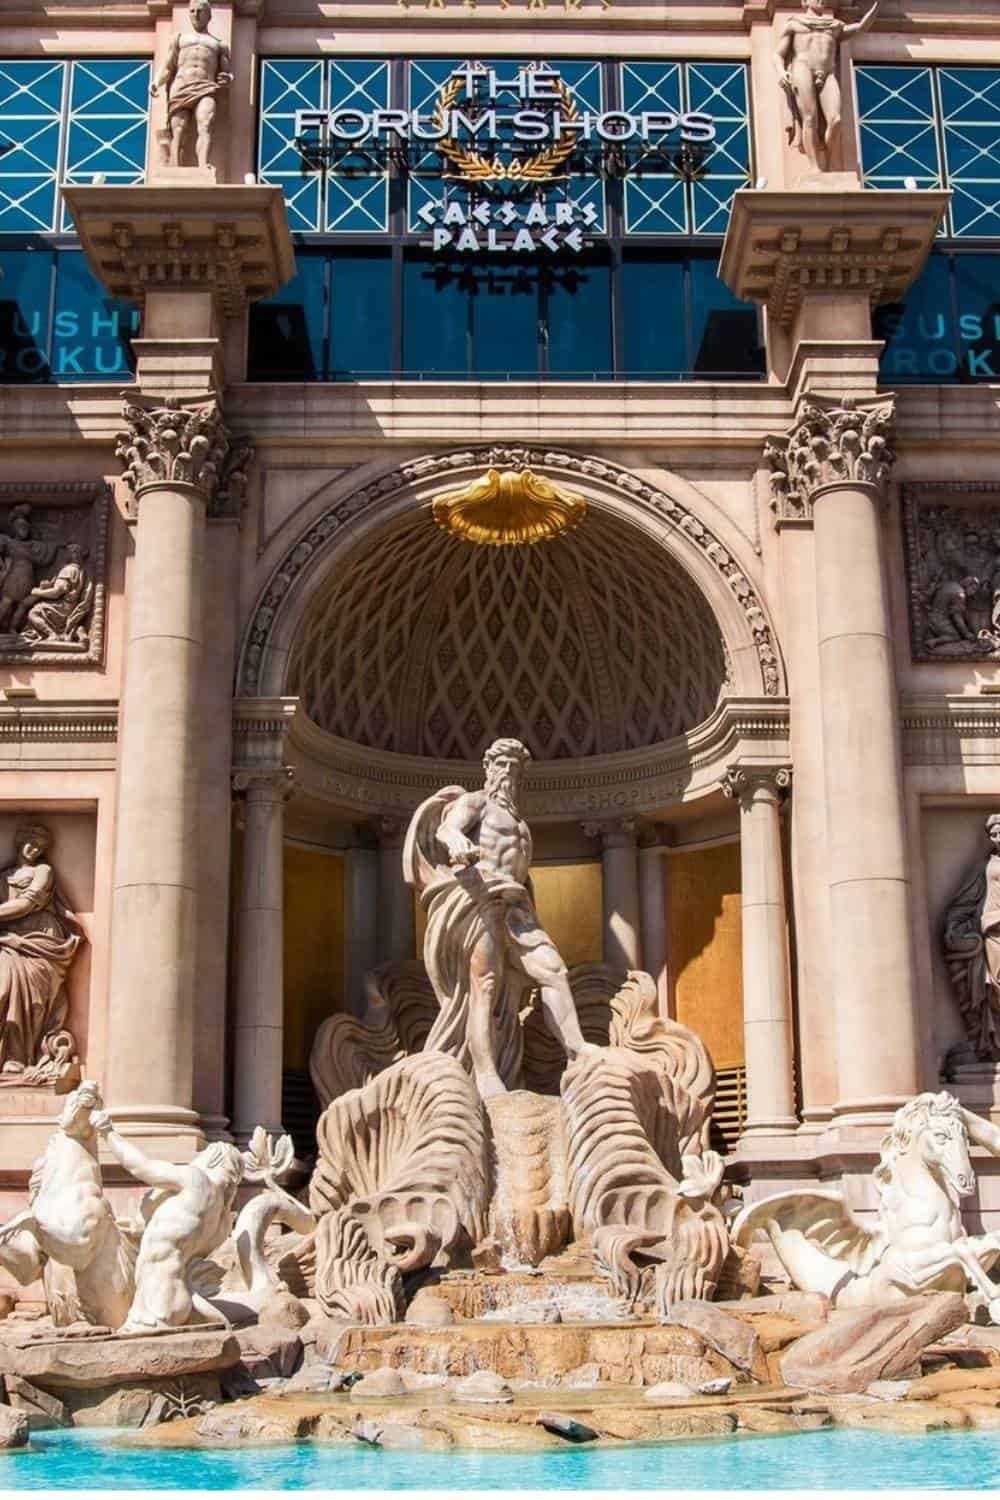 Trevi Fountain at the Forum Shoppes in Caesars Palace in Las Vegas